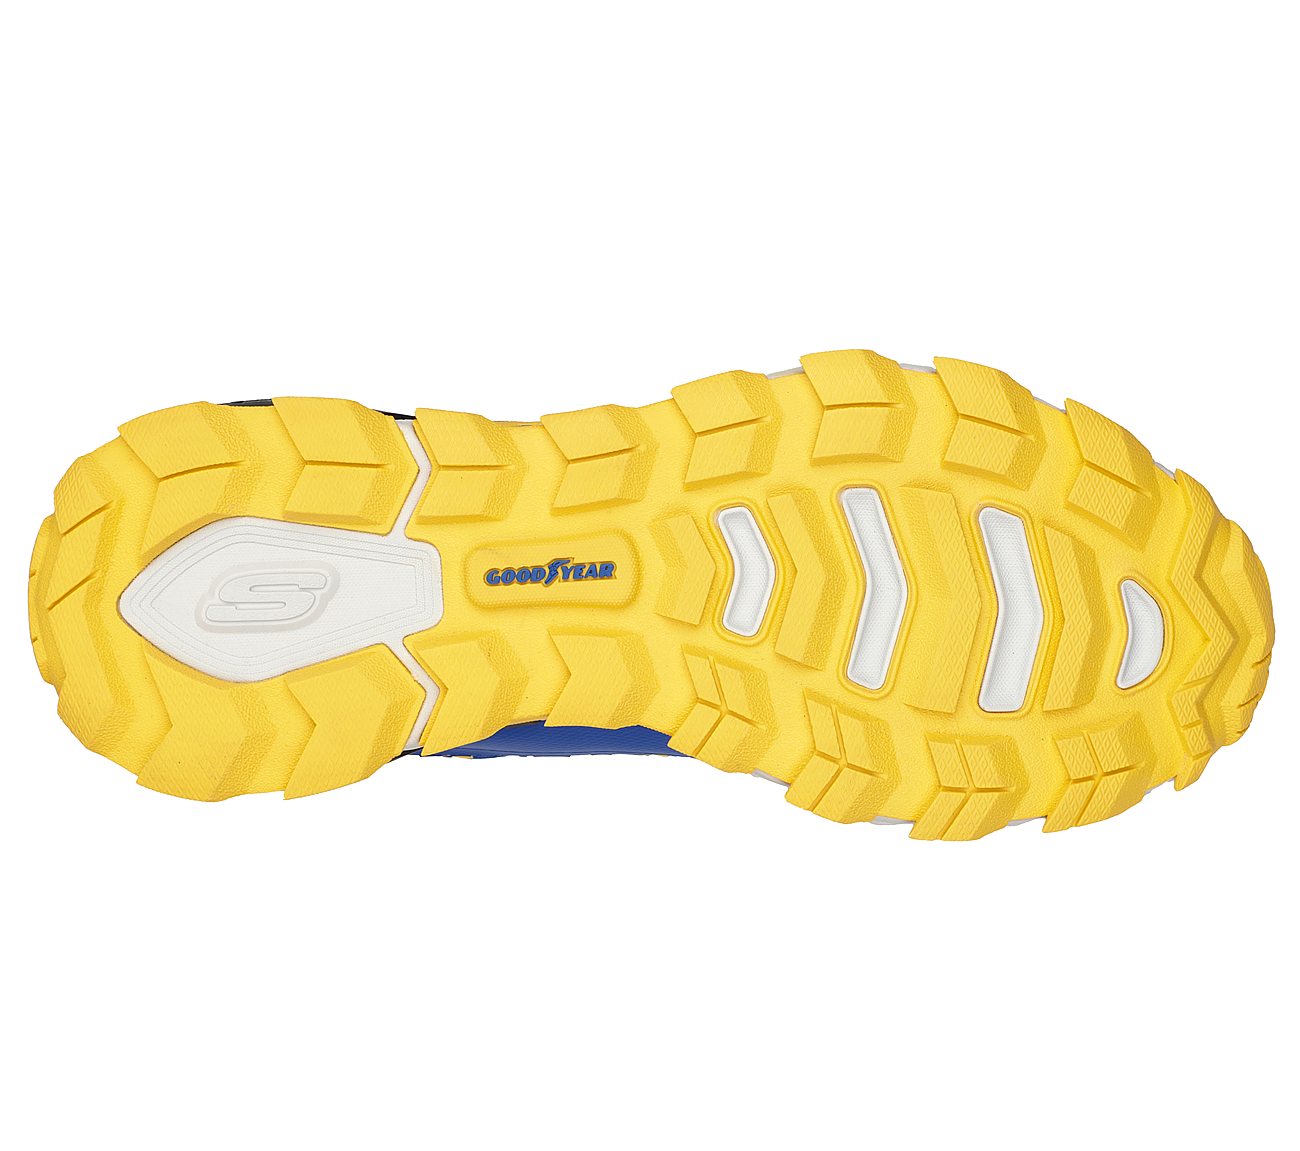 MAX PROTECT- FAST TRACK, BLUE/YELLOW Footwear Bottom View